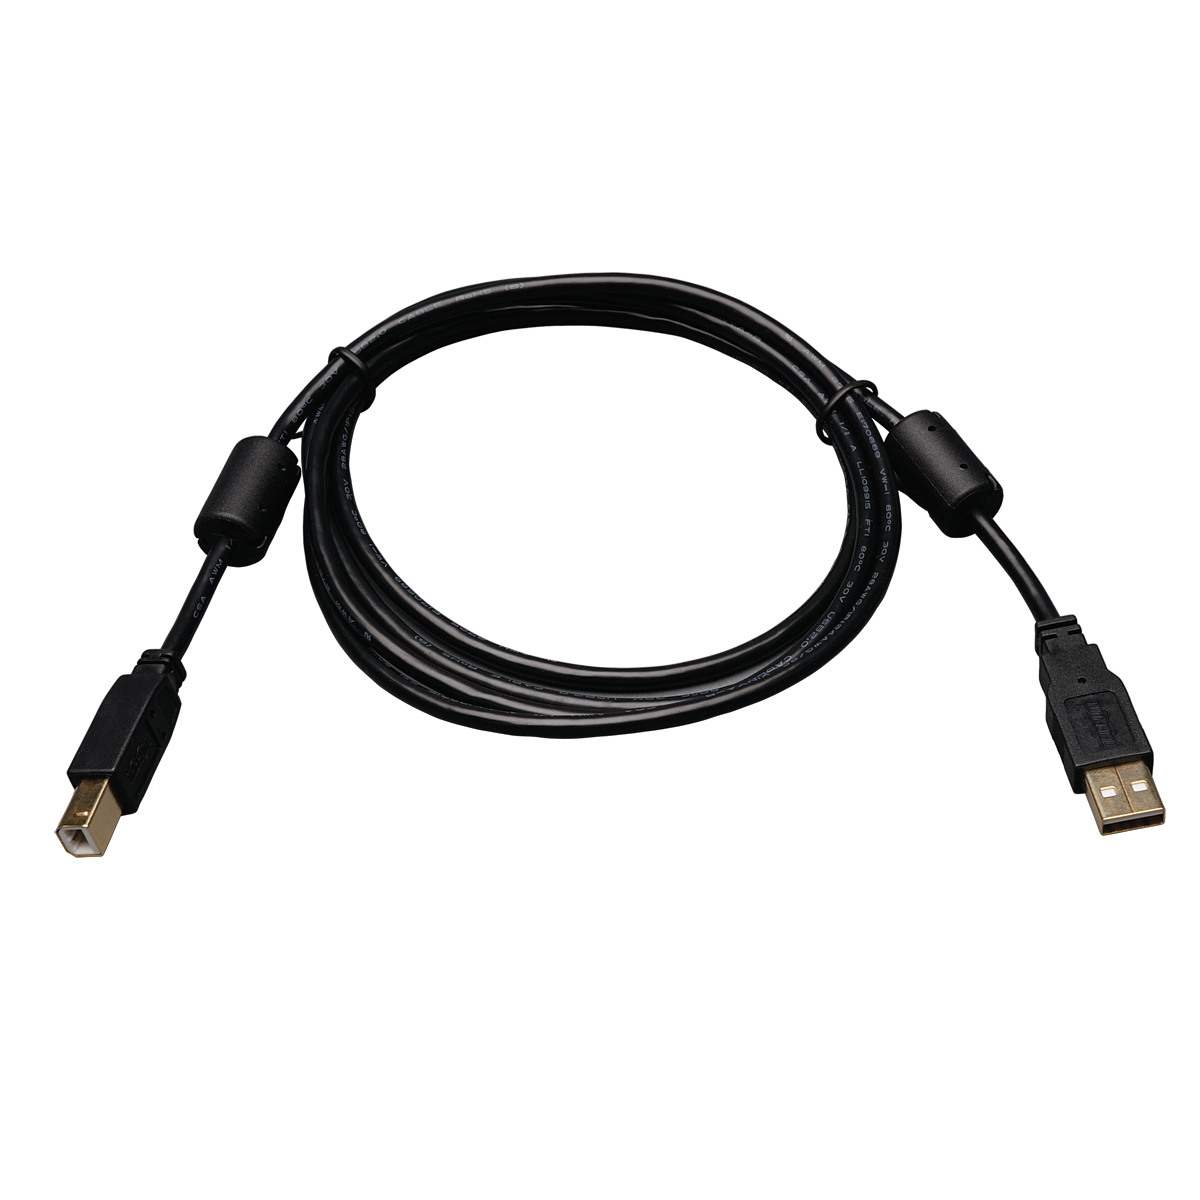 6FT USB 2.0 Cable Type A Male to Type A Male Cable Cord Black 